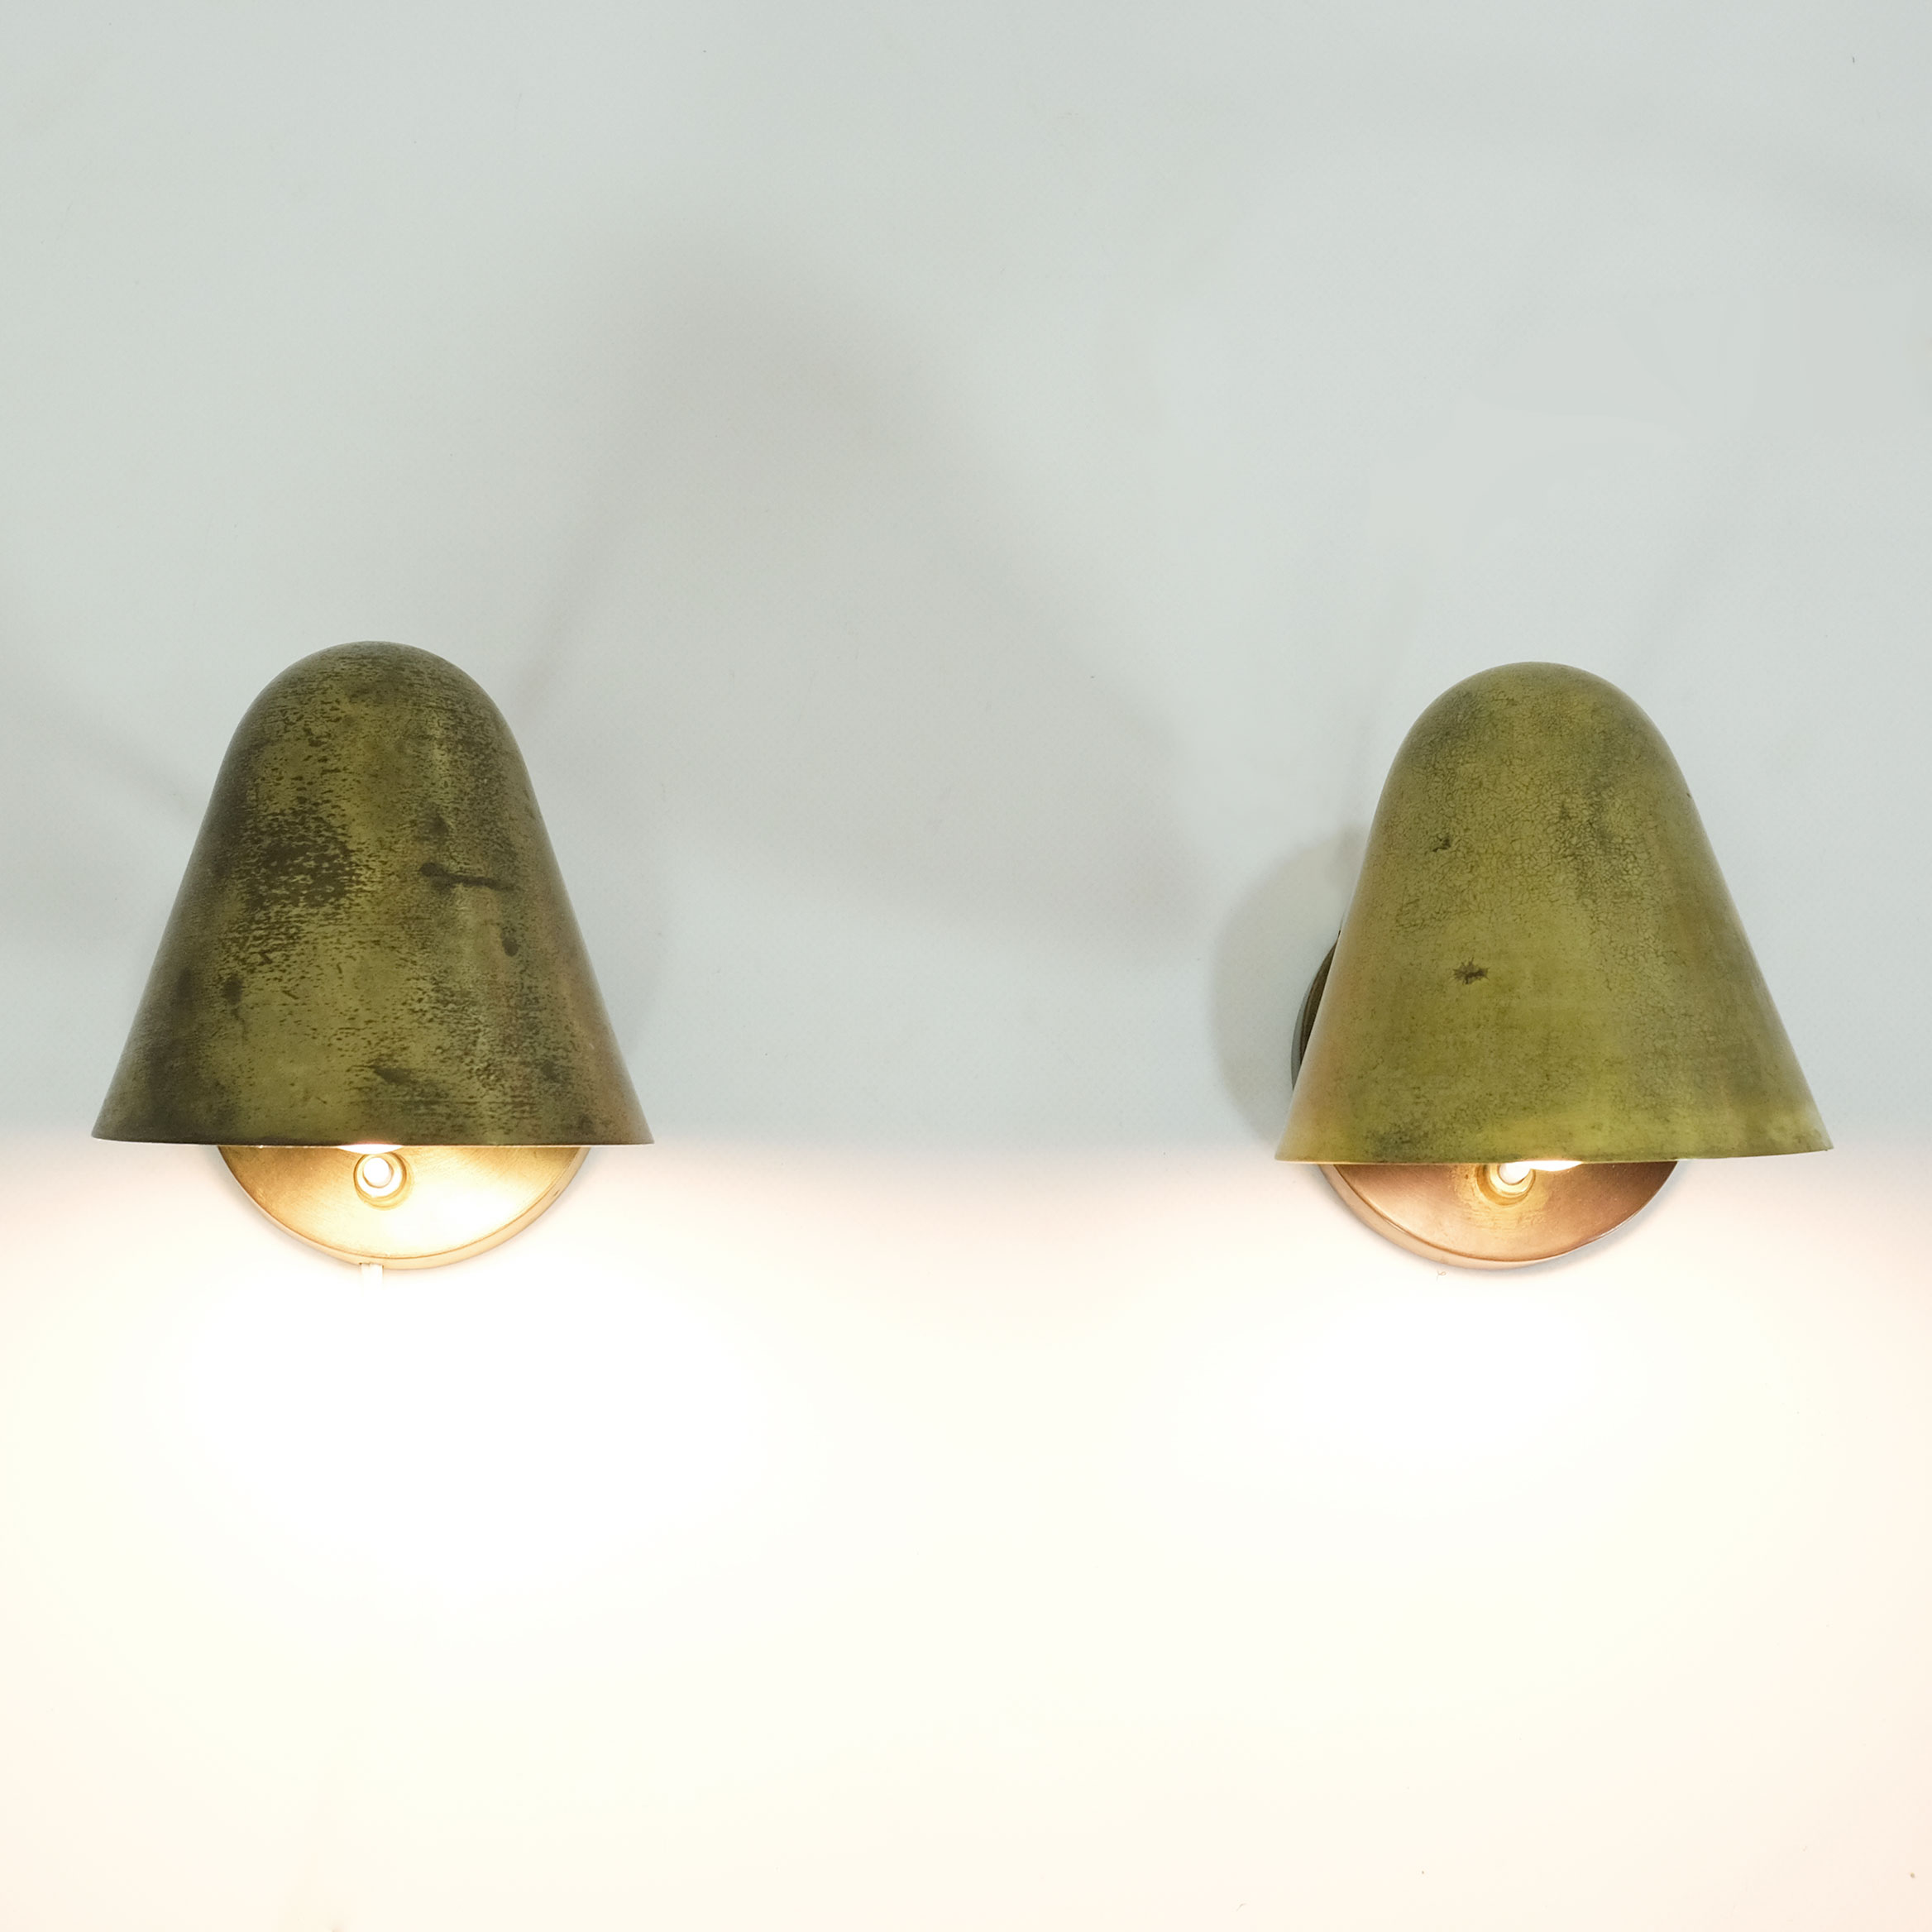 Pair of brass wall mounted lamps from the 1950’s.